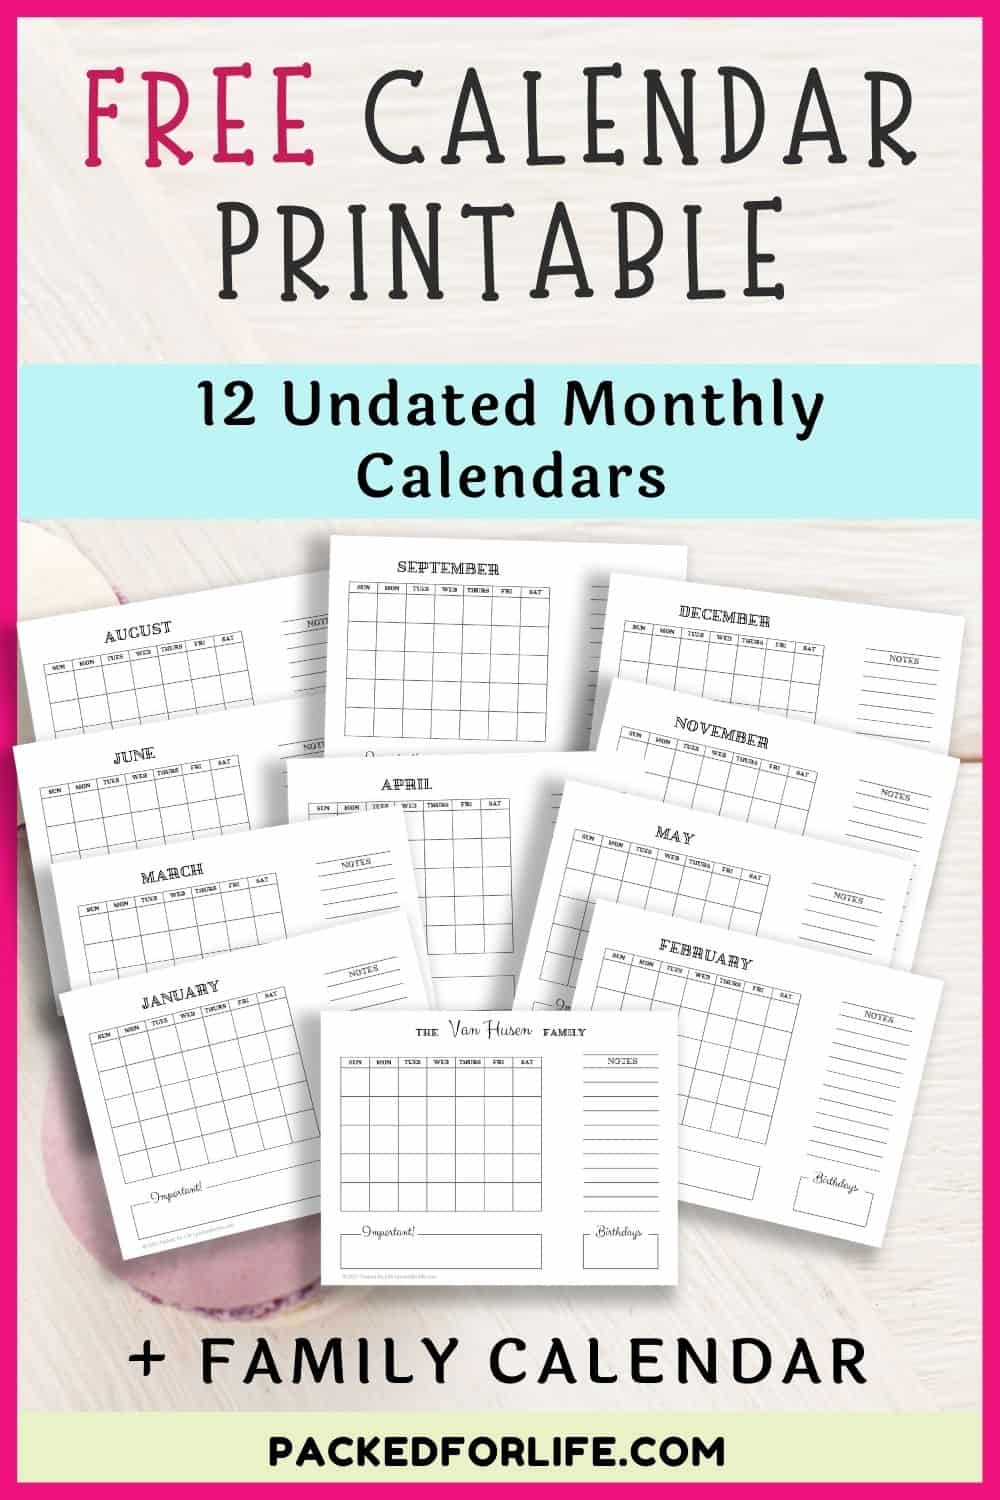 Fun (& Free) Printable Calendars 2022 to 2023 | Packed for Life